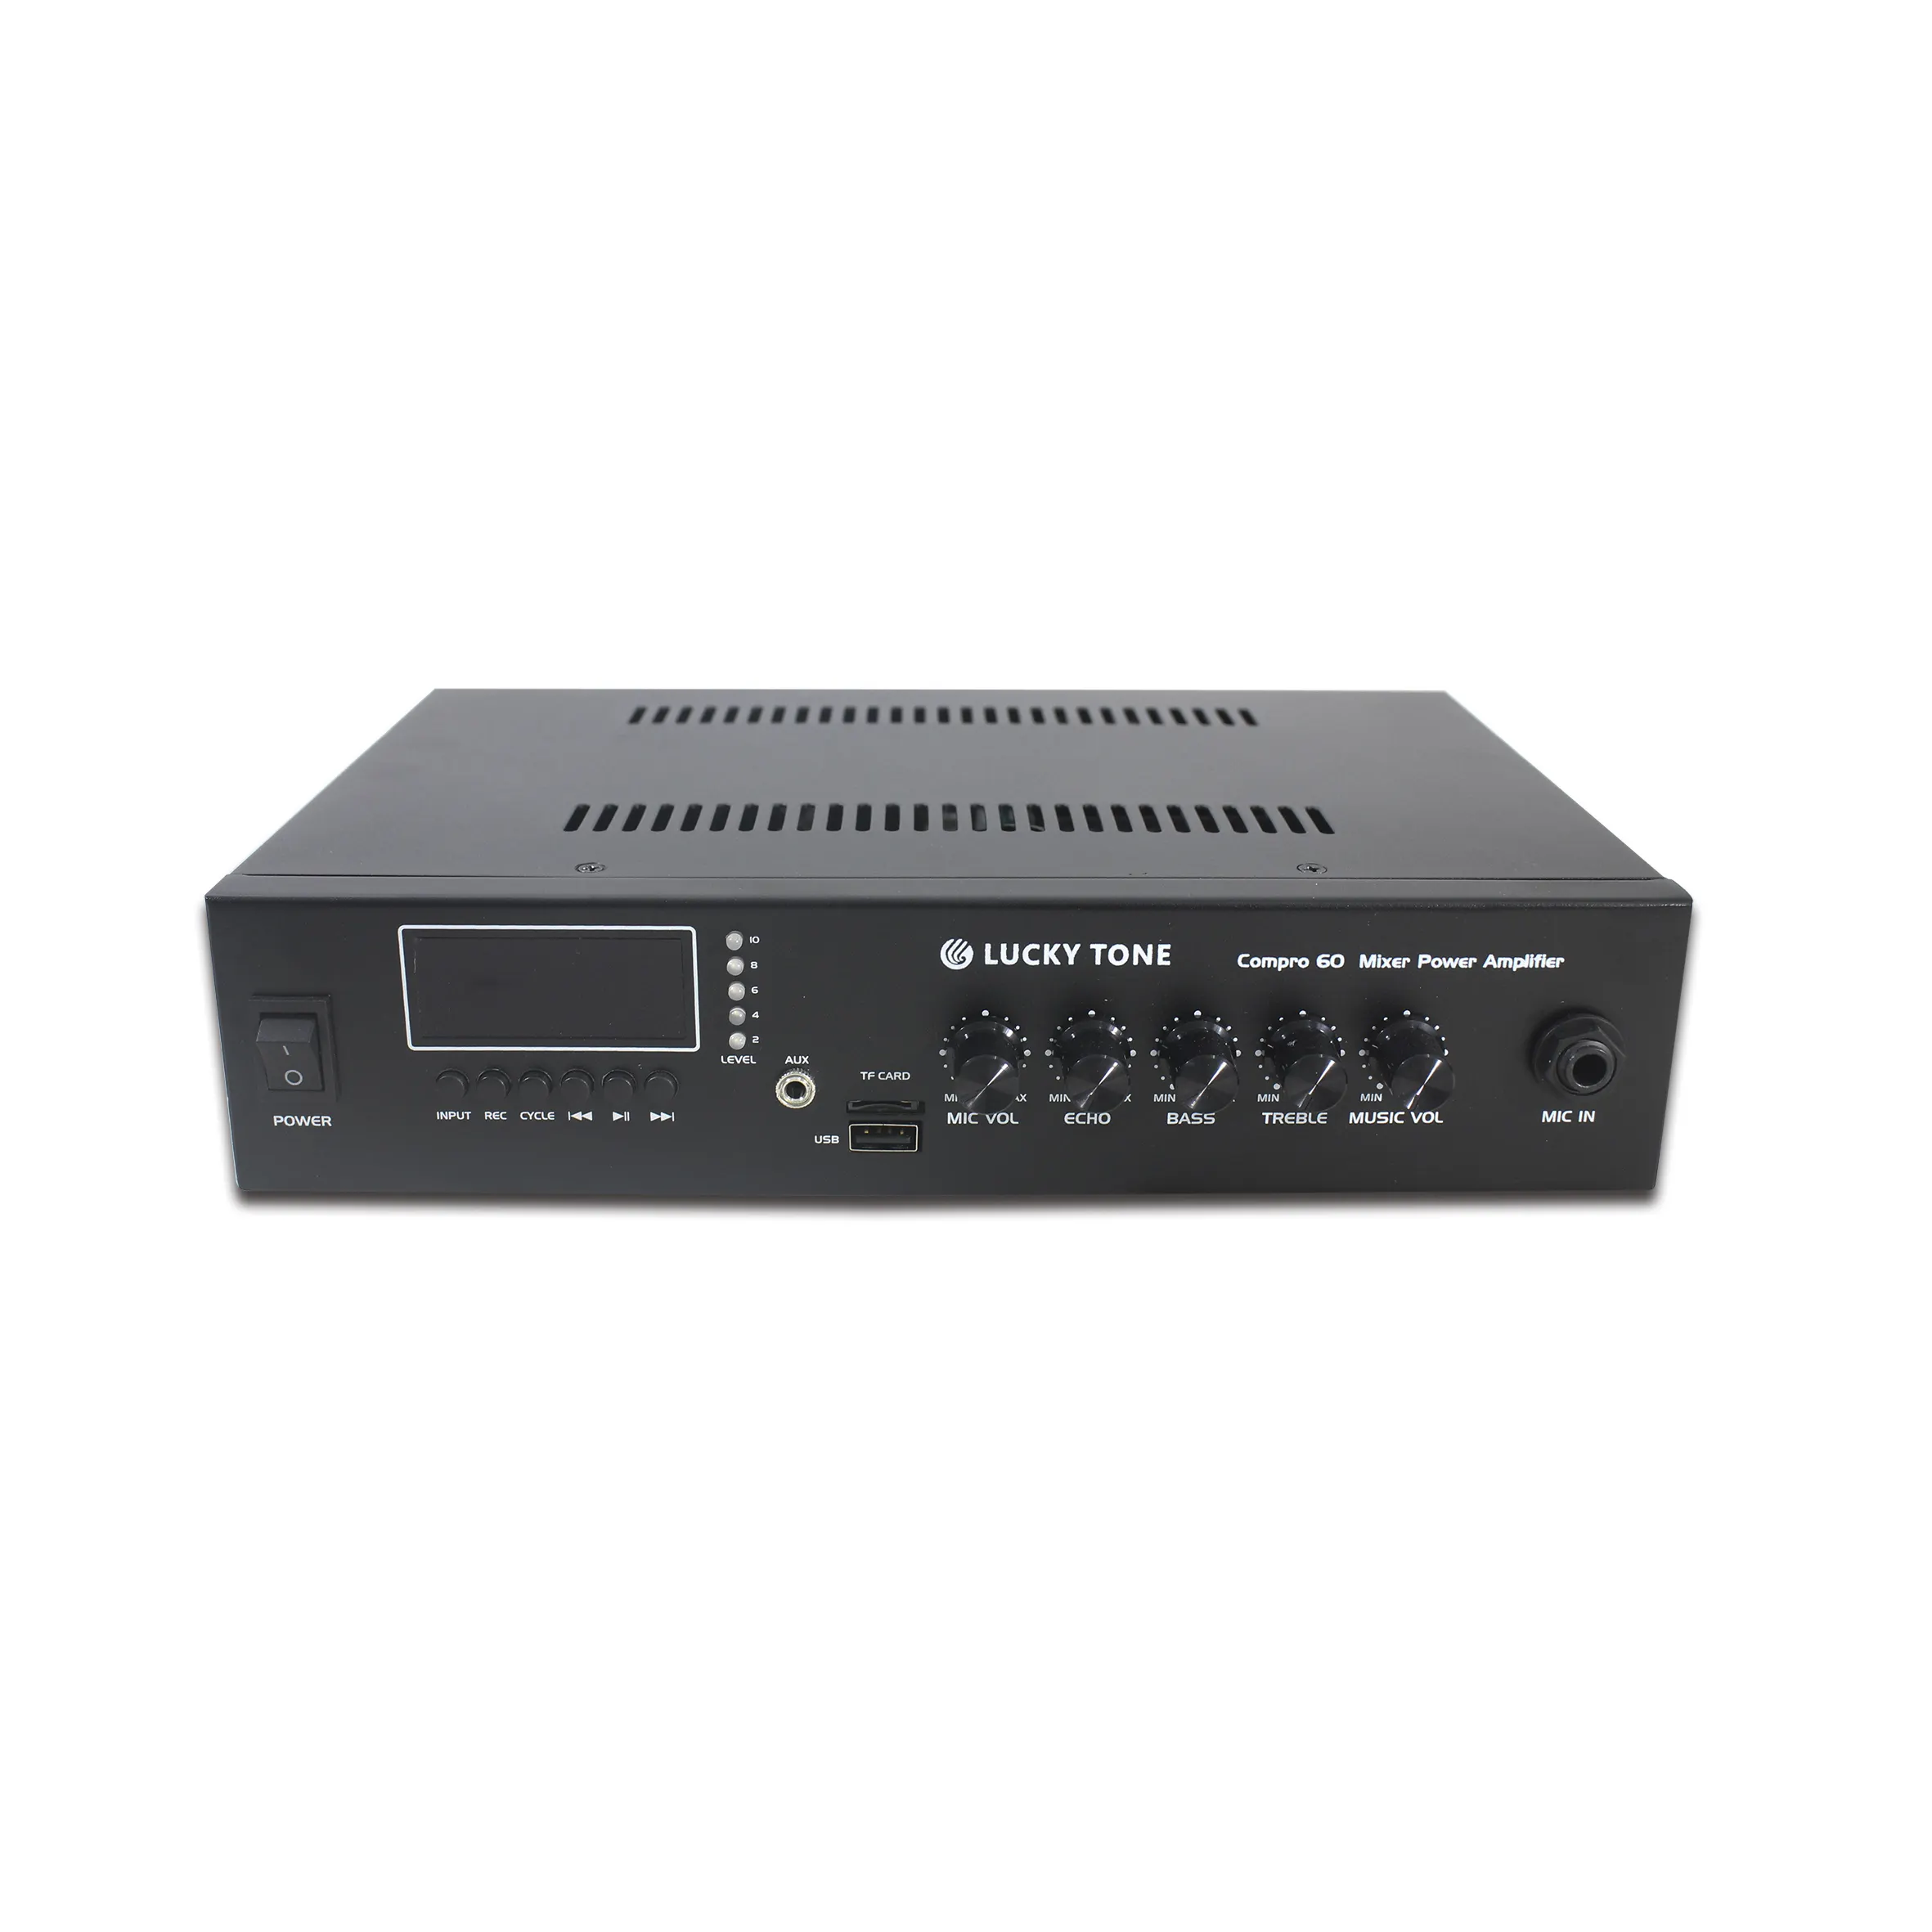 80W Mini Bluet ooth Mixer Audio Amplifier with Mp3, FM tuner, TF Card, Echo, Paging for Commercial PA System